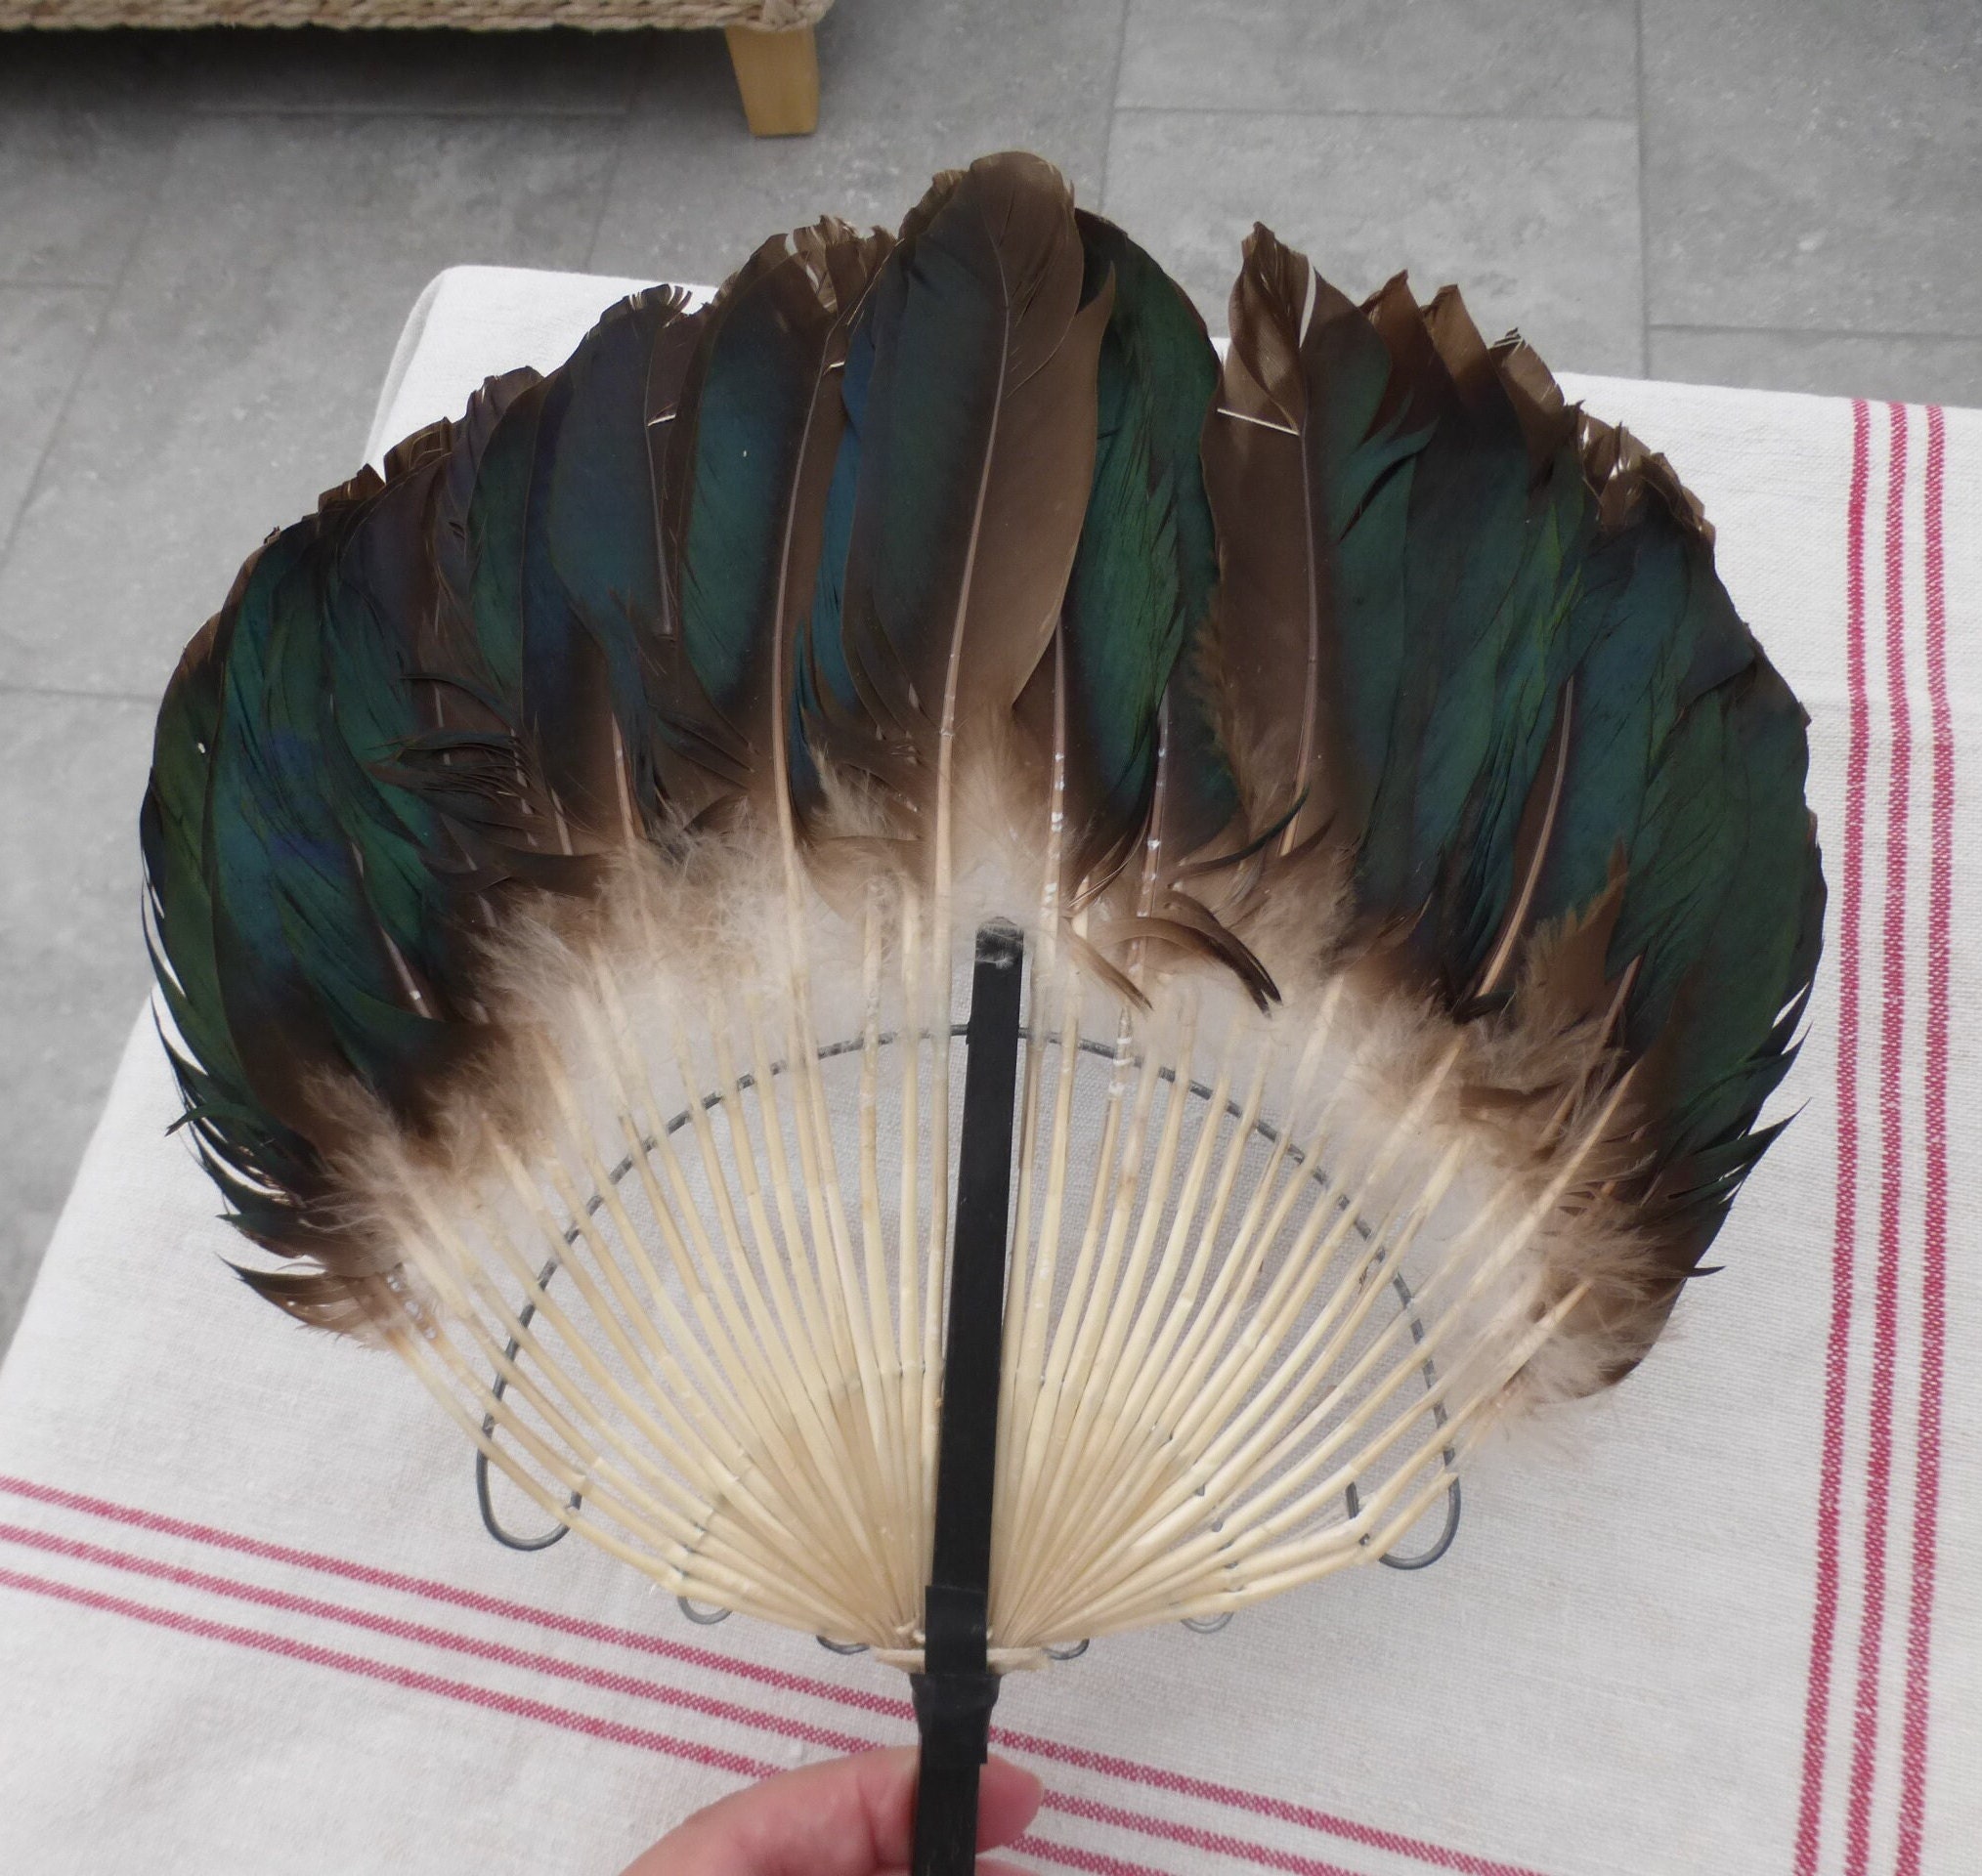 Antiques & Uncommon Treasure Antique French Hand Fan, 81 cm span, Black Ostrich Feather and Tortoise Shell Monture, Edwardian